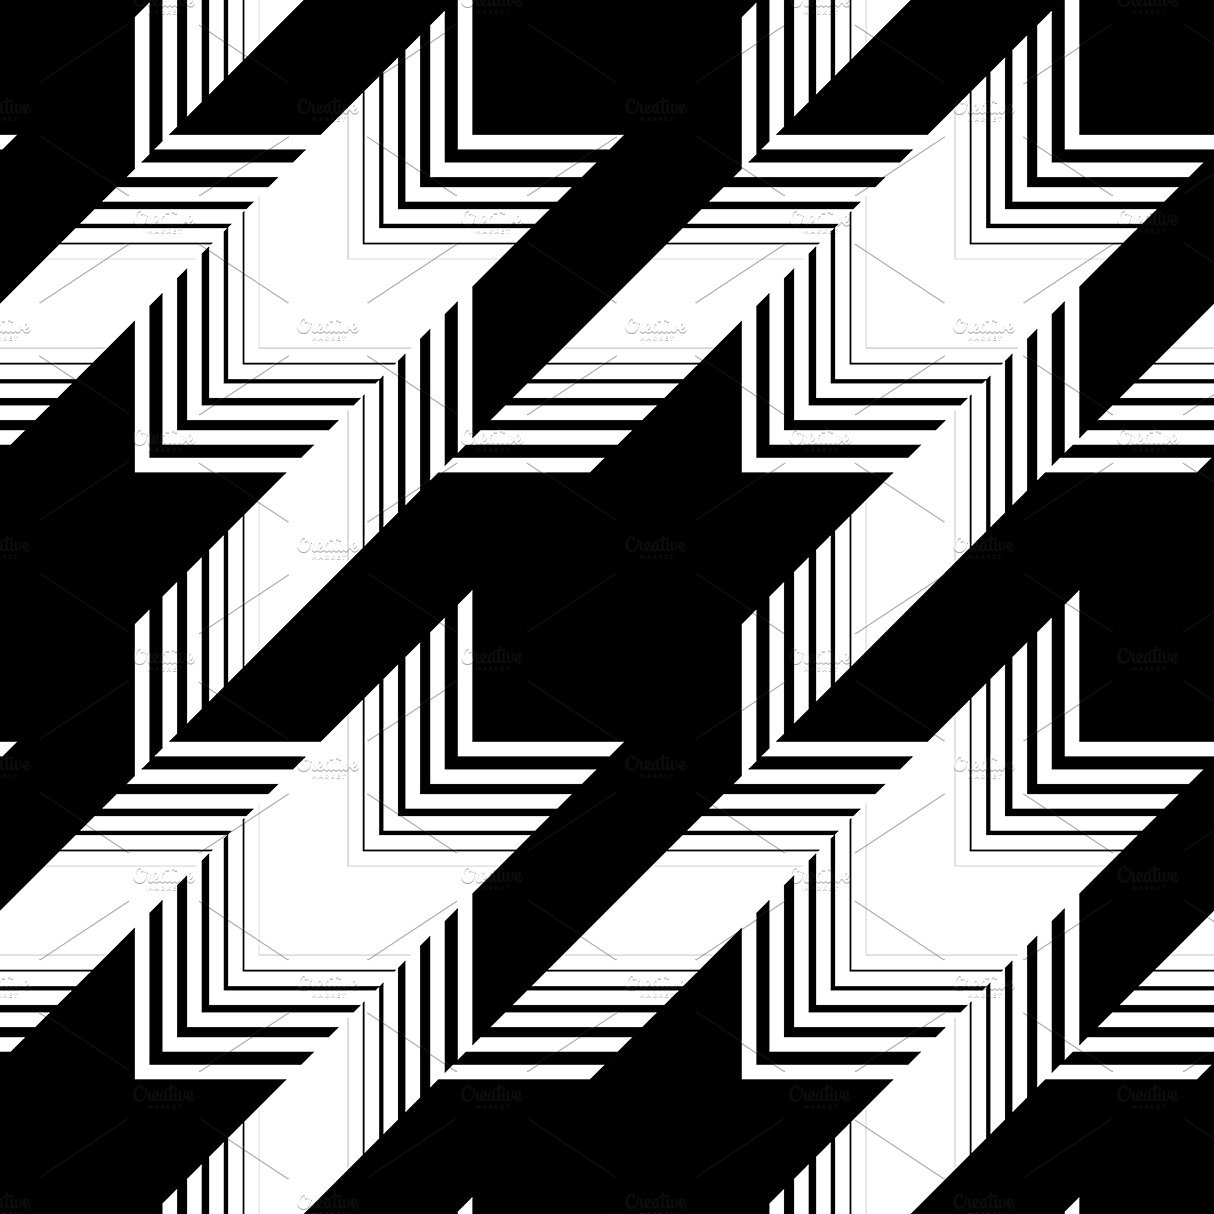 10 houndstooth patterns preview image.